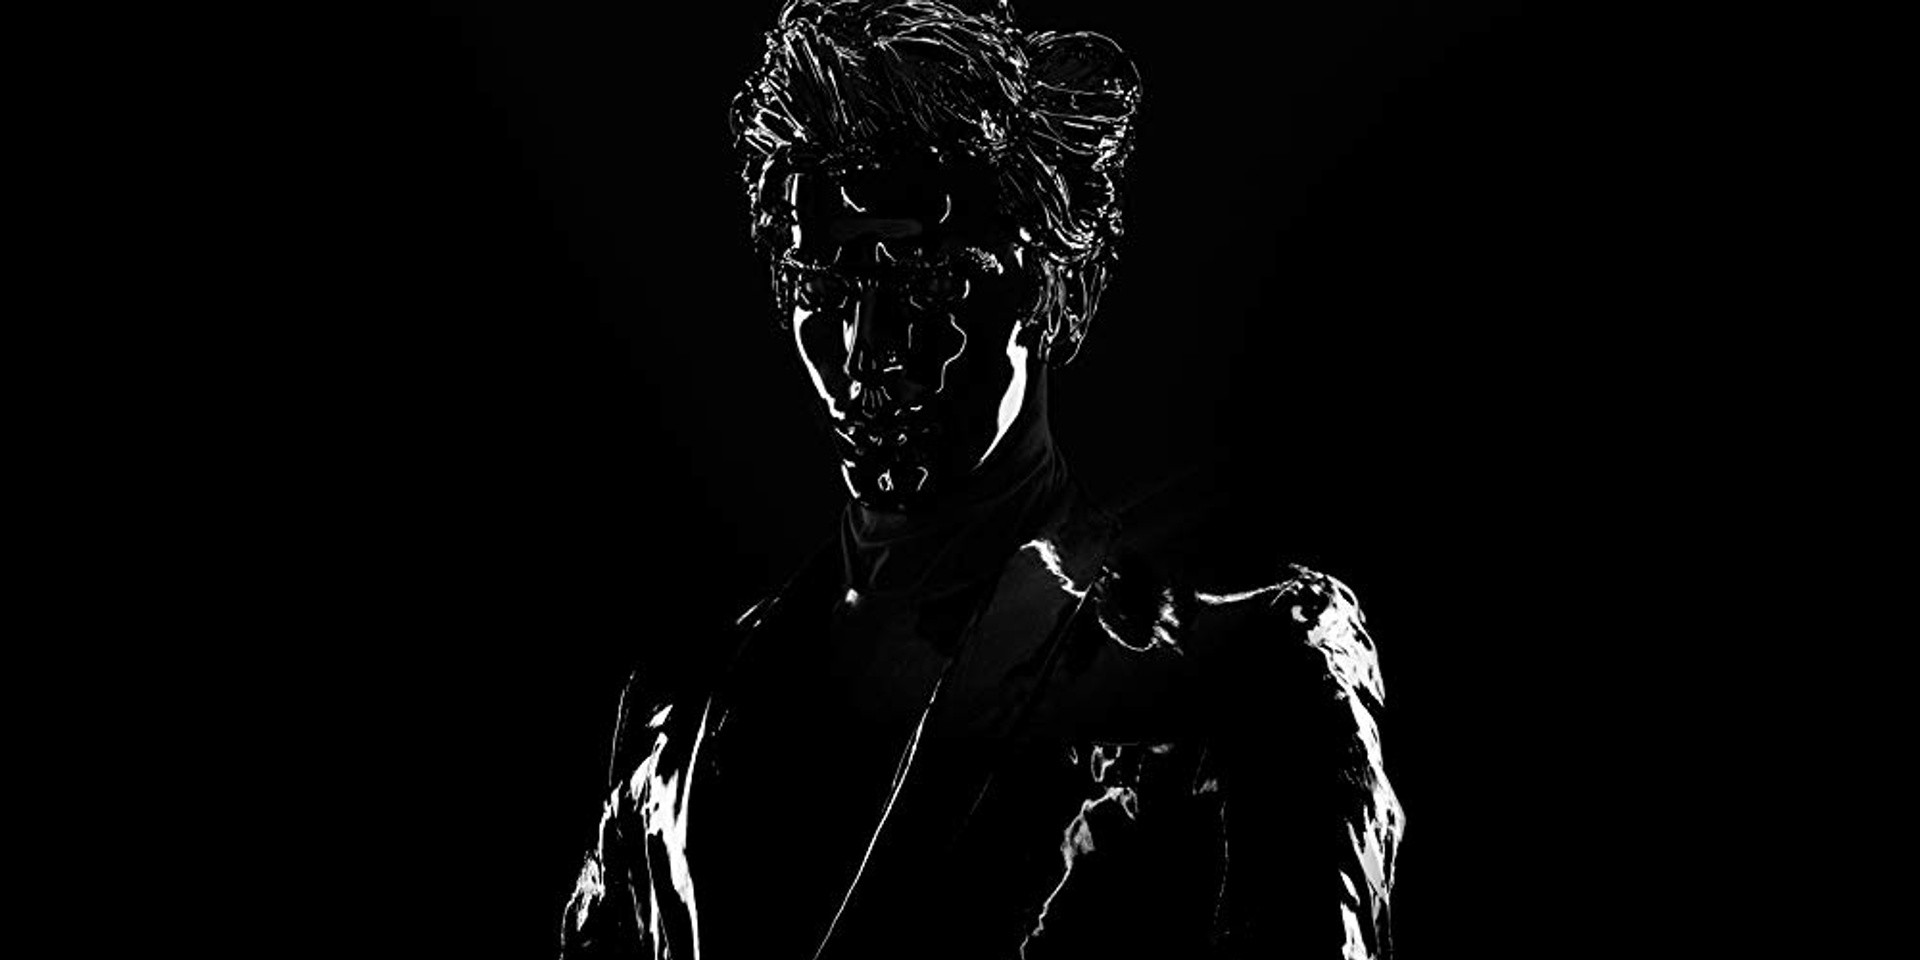 Gesaffelstein announces release date and tracklisting for upcoming album Hyperion